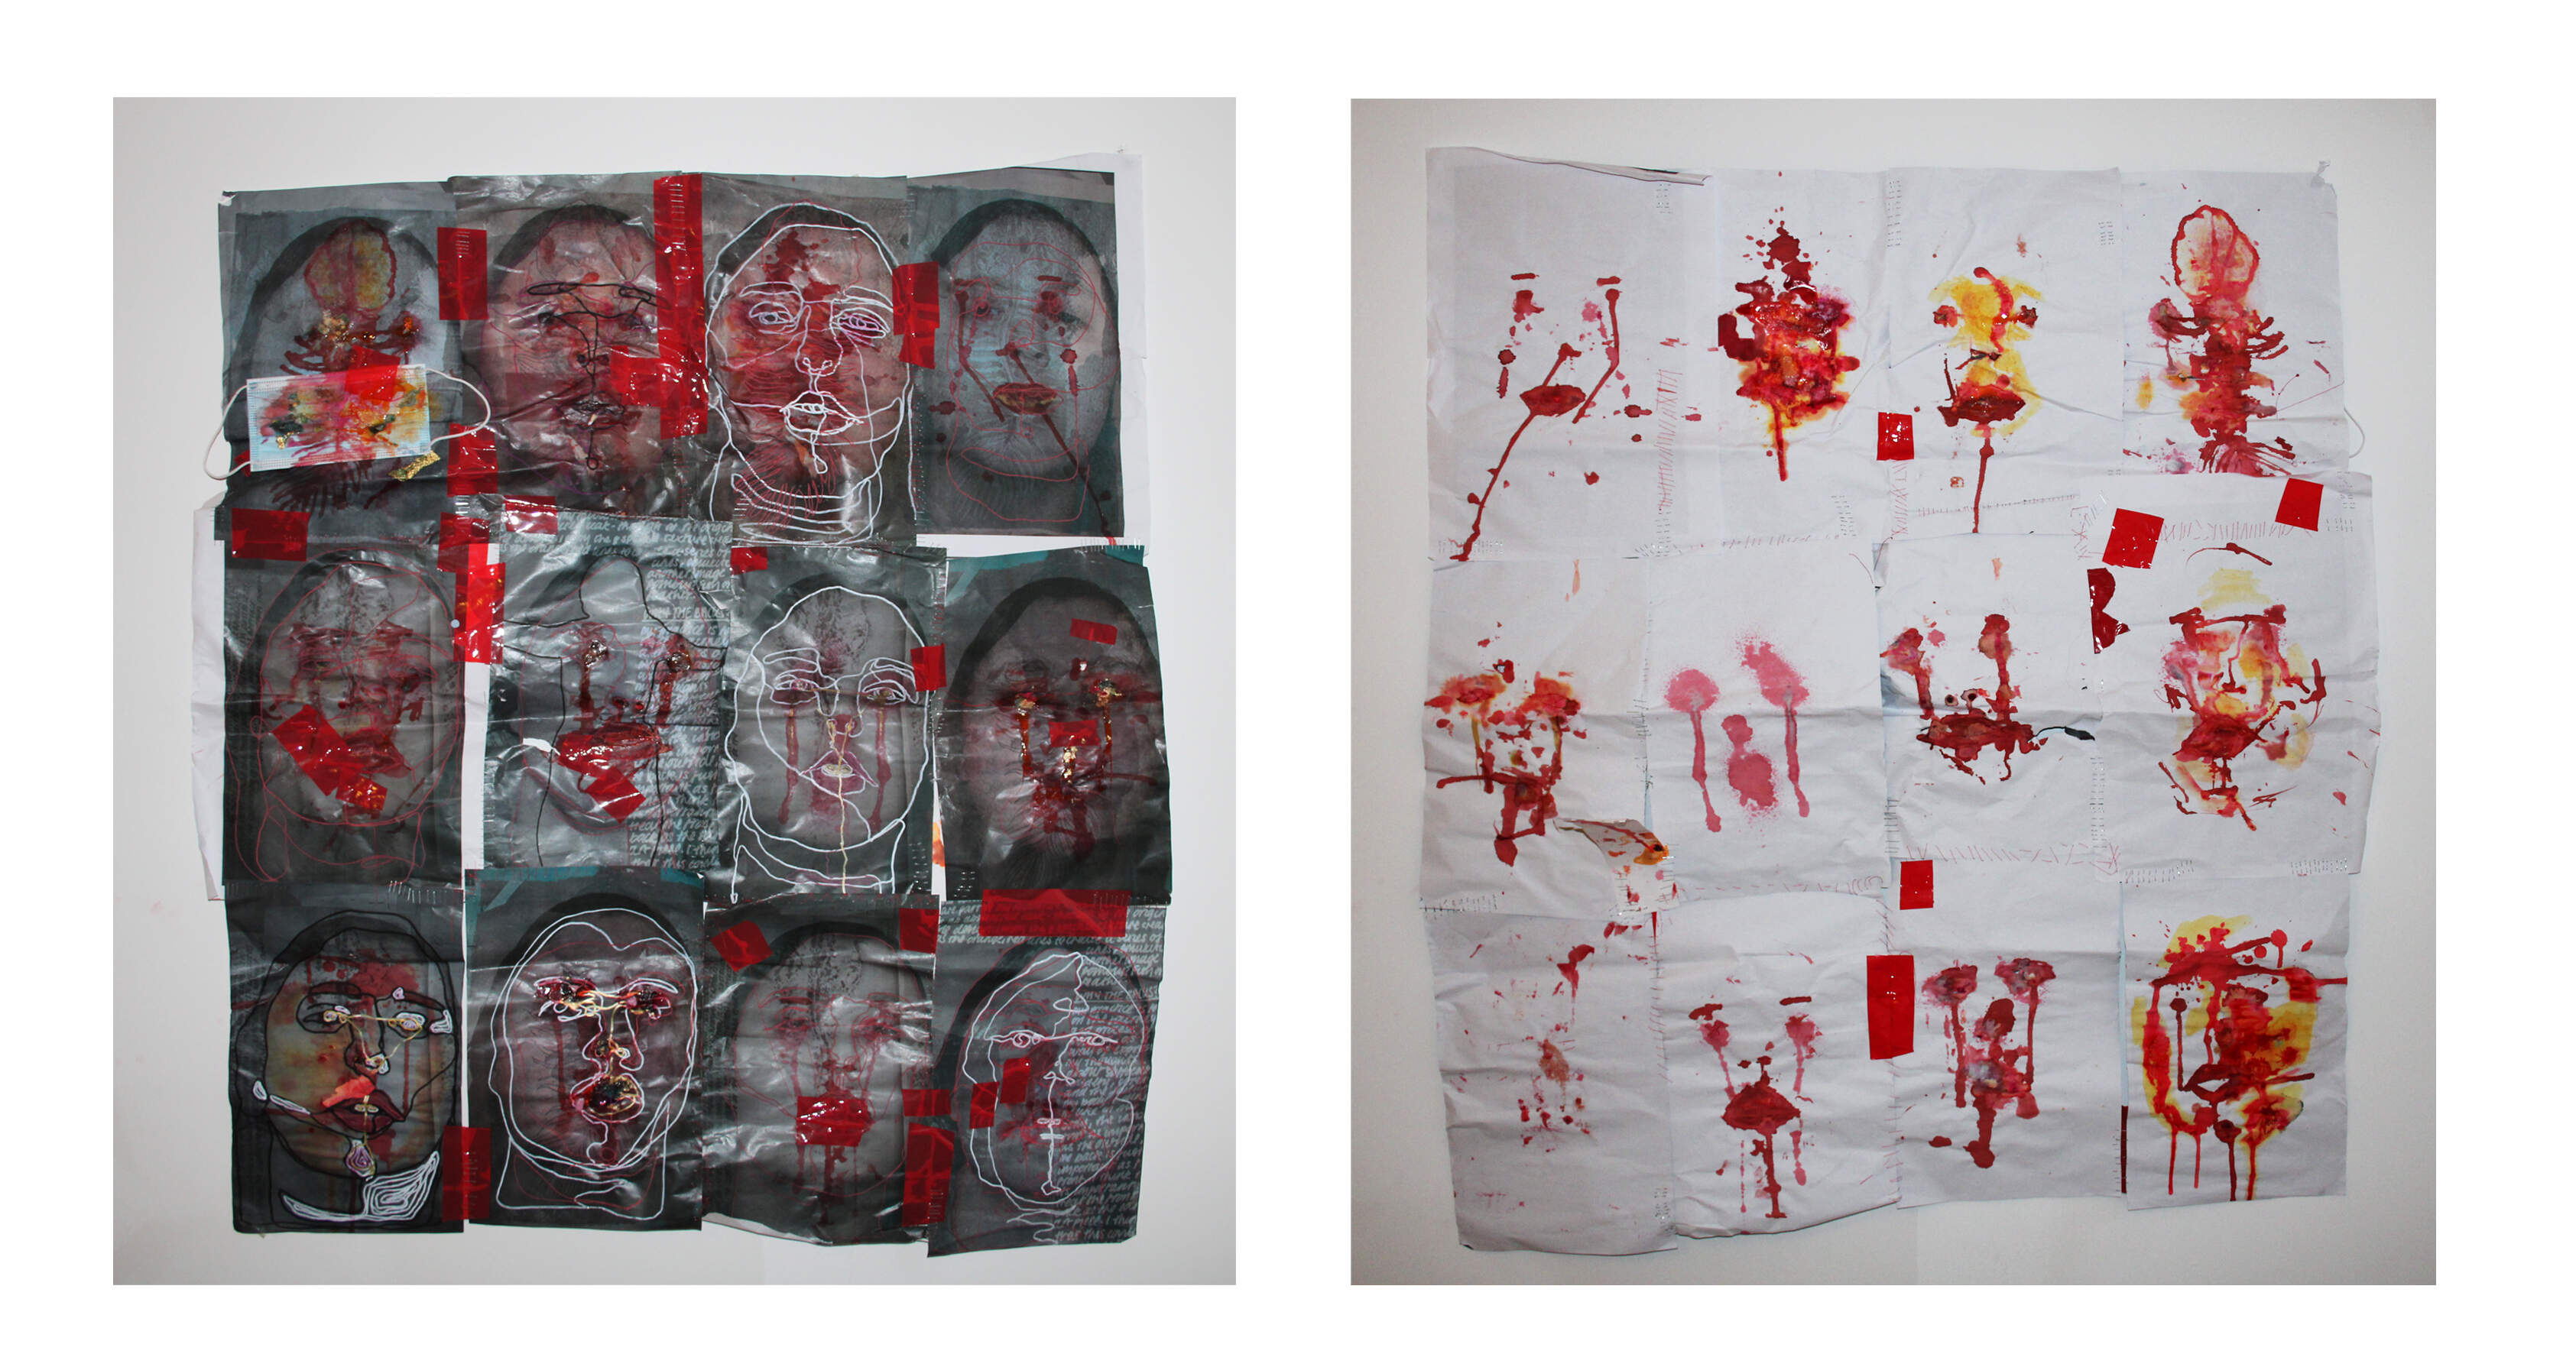 12 portraits sewn to create a quilt to be used as a prop within performances. 63x90cm